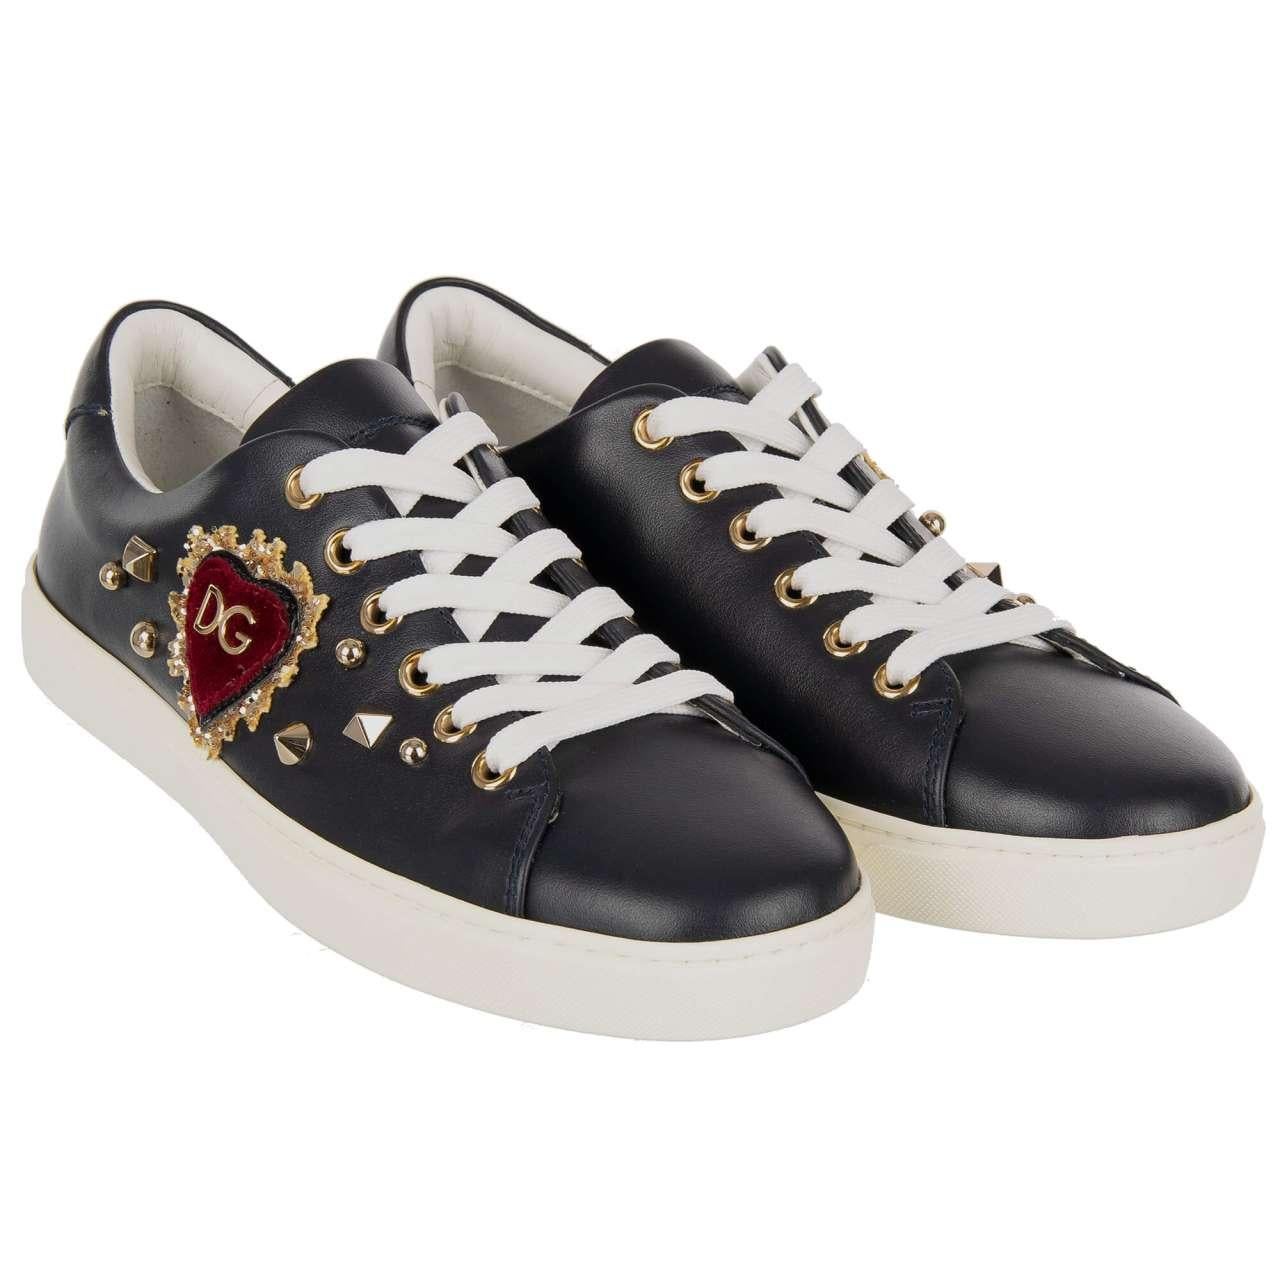 - Leather Sneaker LONDON with DG velvet Heart patch and studs in dark blue and white by DOLCE & GABBANA - New with Box - MADE IN ITALY - Model: CK0167-B5294-8H415 - Material: 100% Calf leather - Sole: Rubber - Color: White / Dark Blue - DG Heart